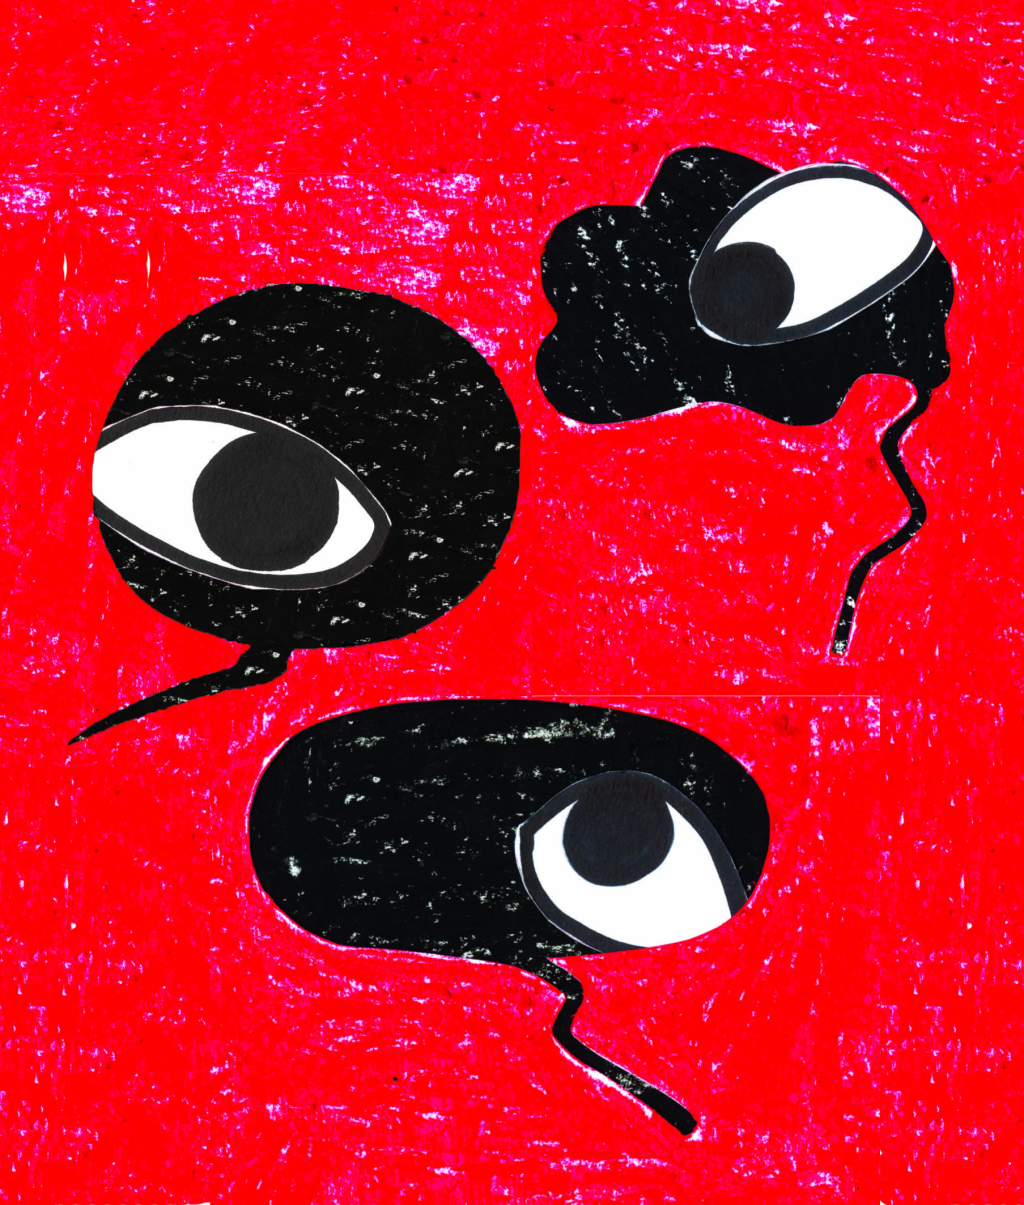 An illustration by Tania Perez depicting three eyes in speech bubbles.